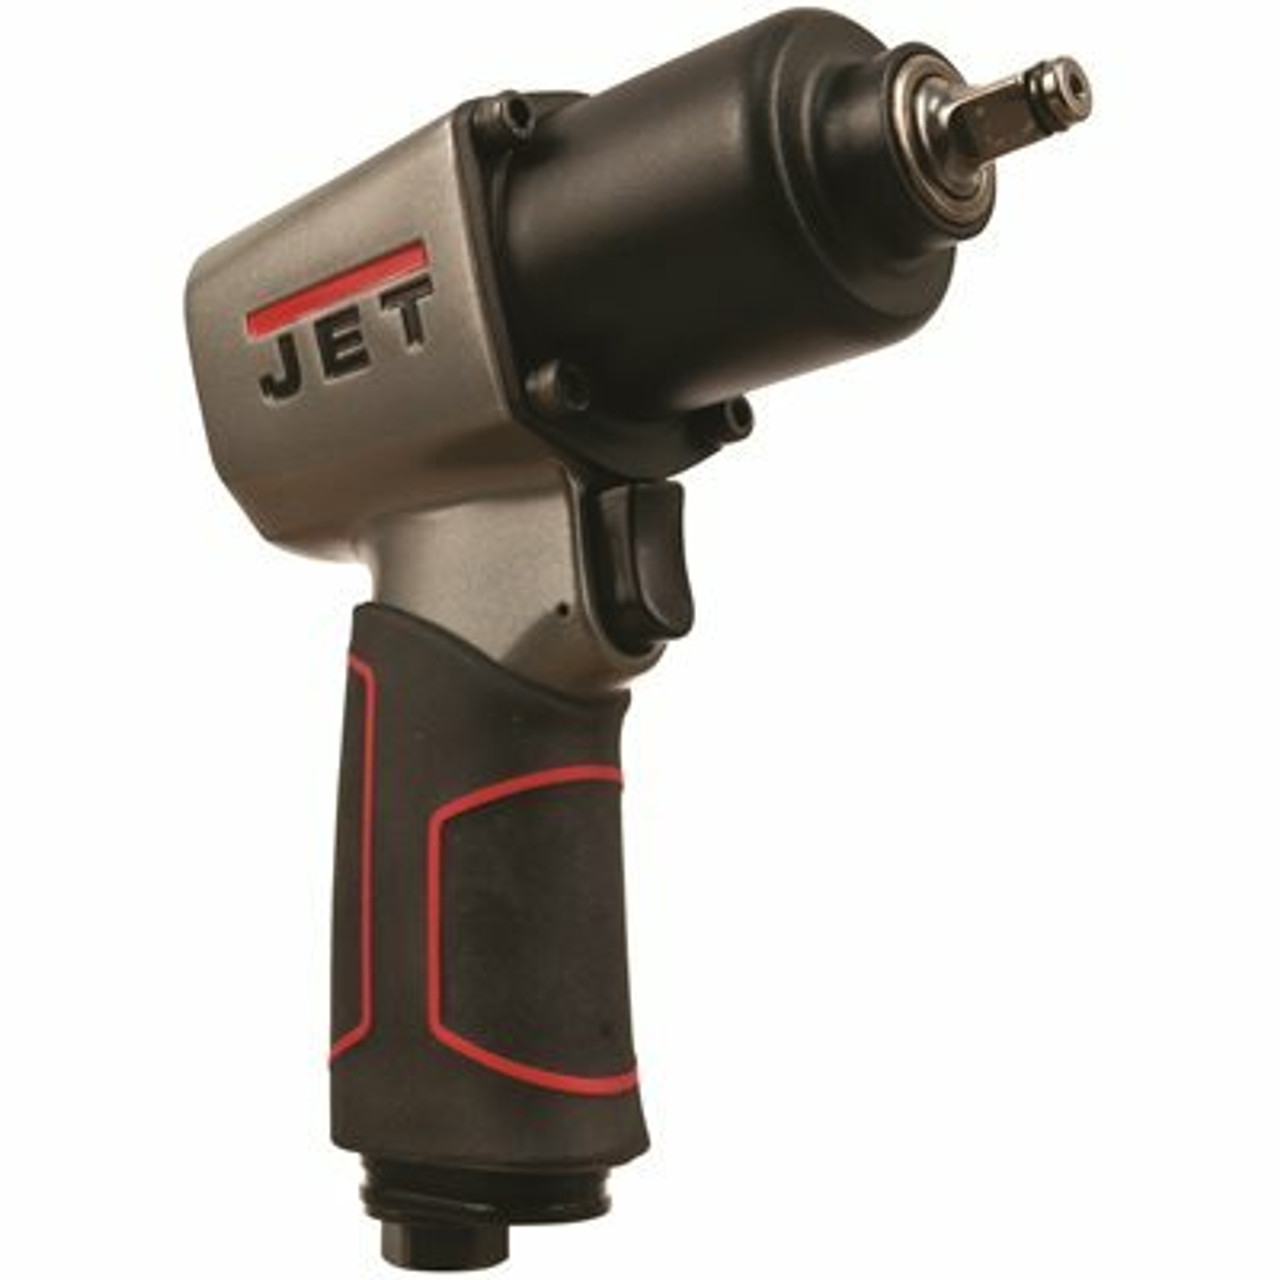 Jet 3/8 In. Impact Wrench Airtool